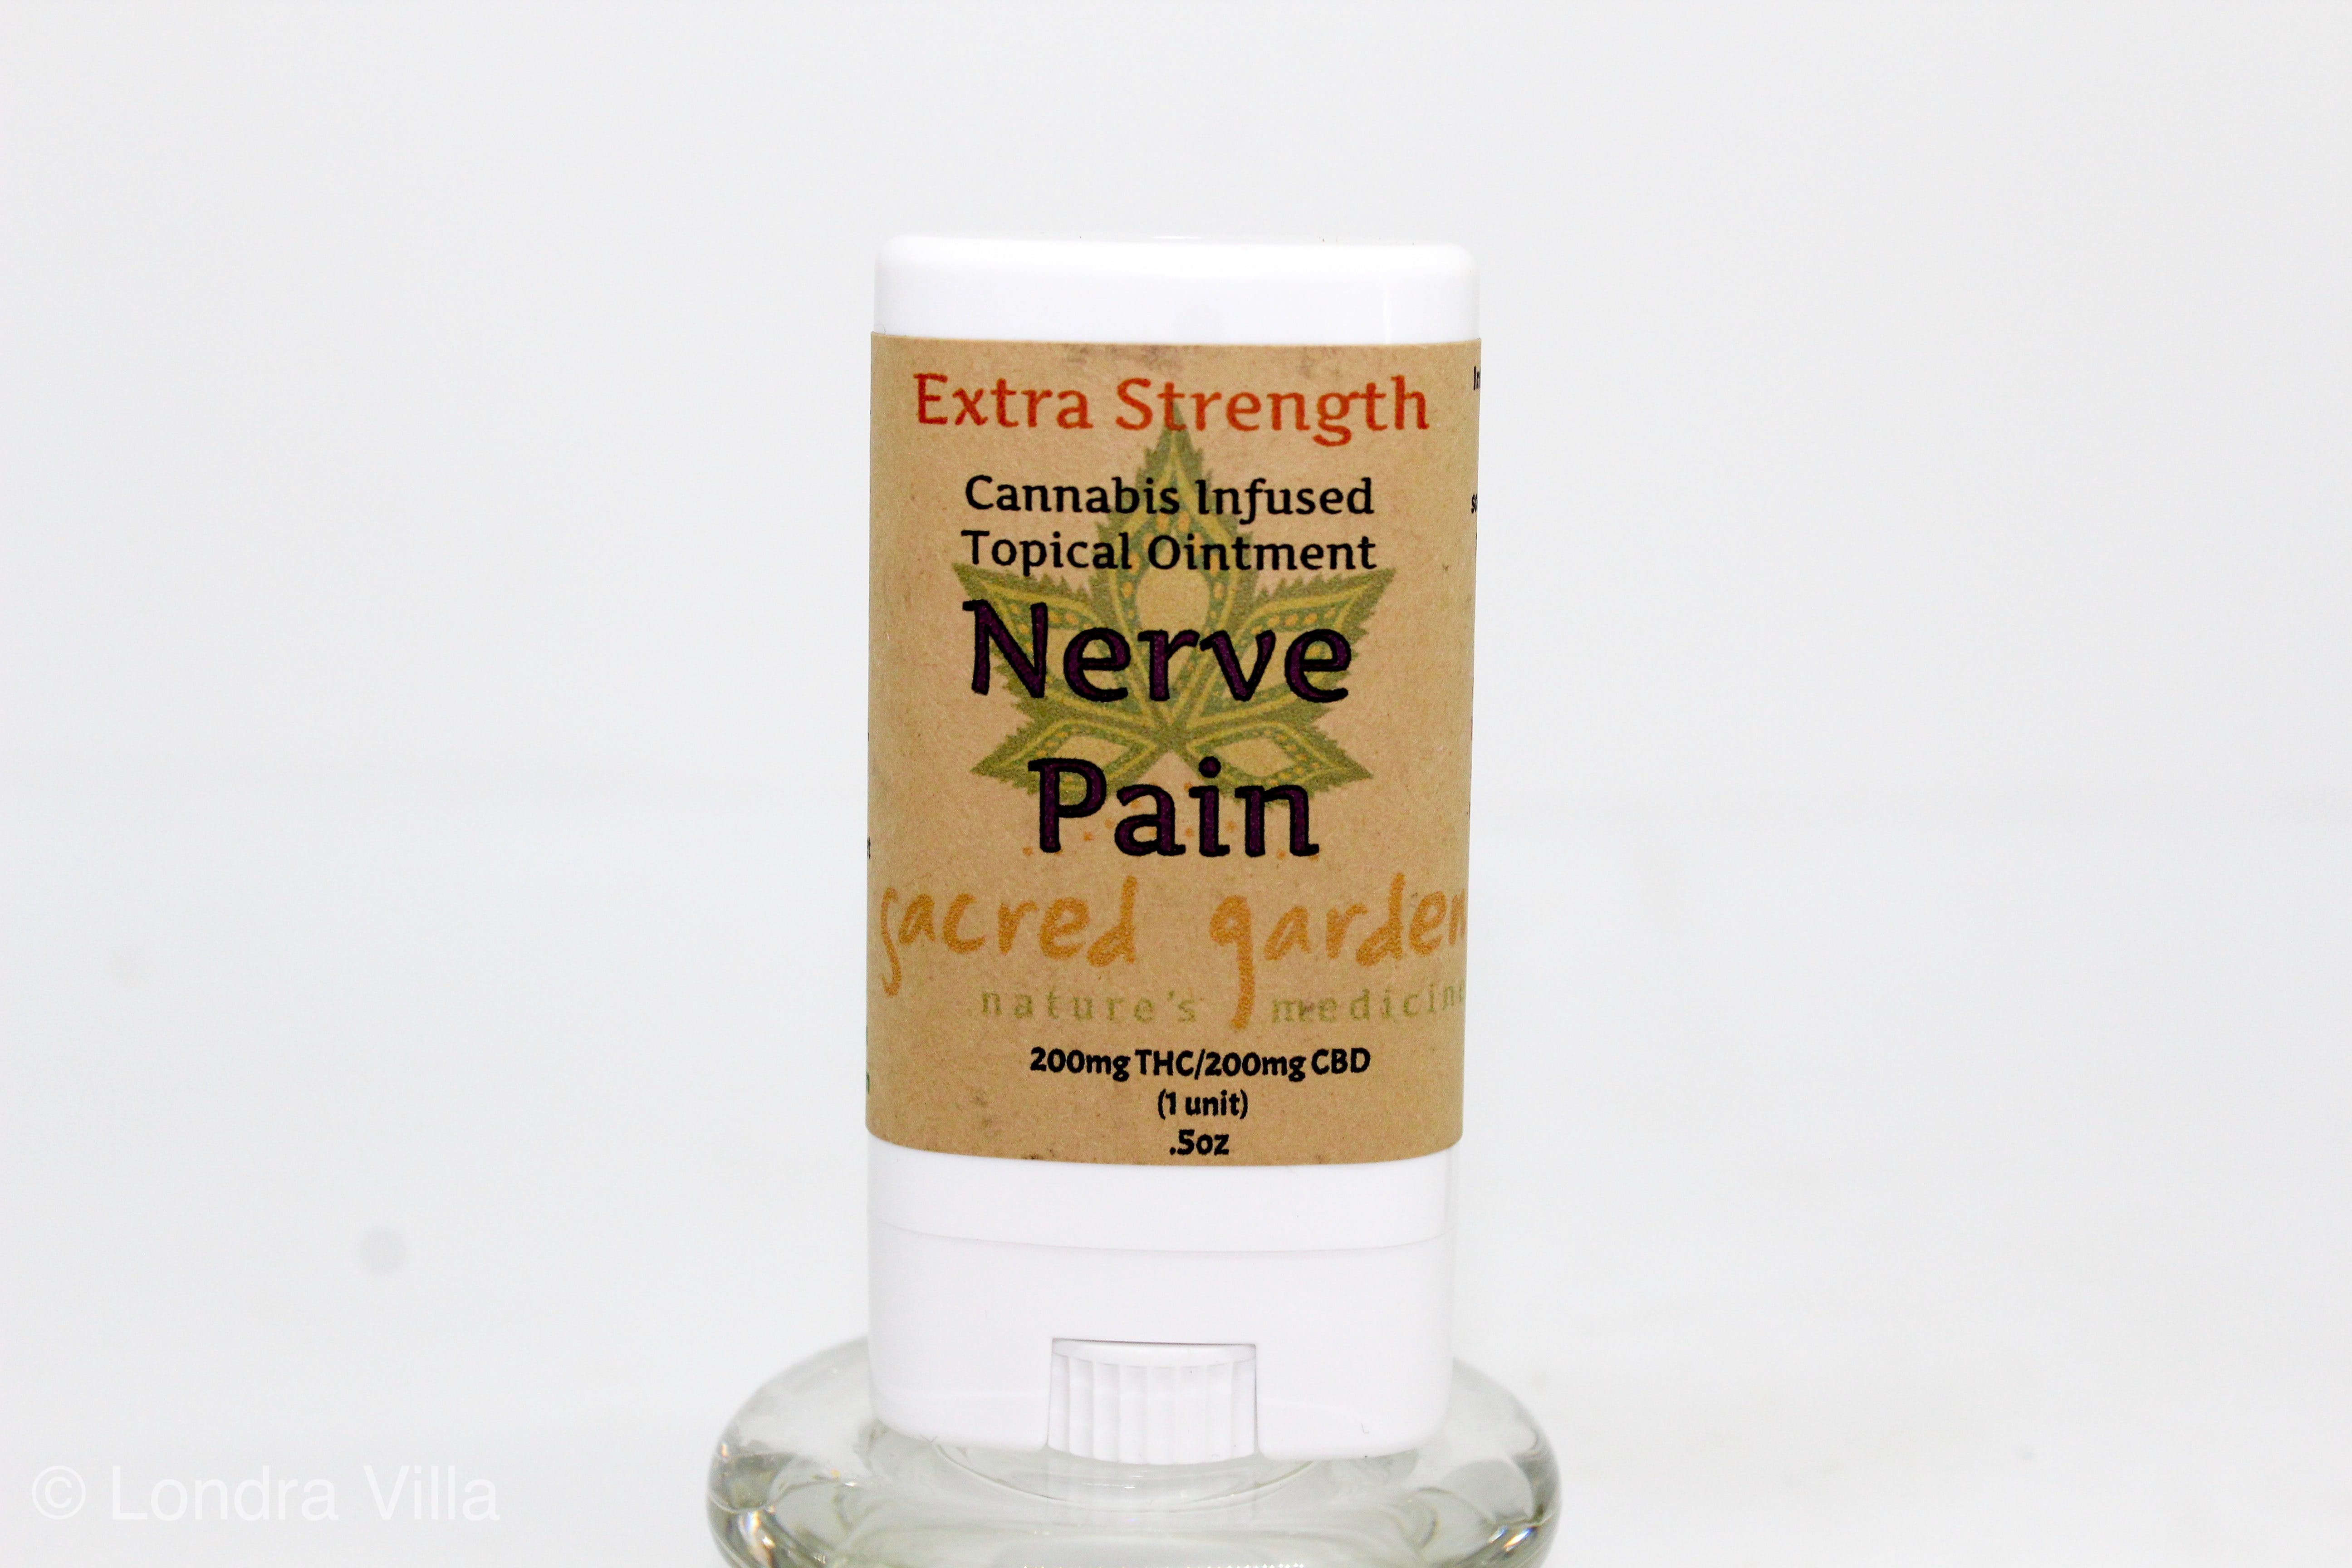 topicals-nerve-pain-stick-extra-strength-5oz-100mg-thc